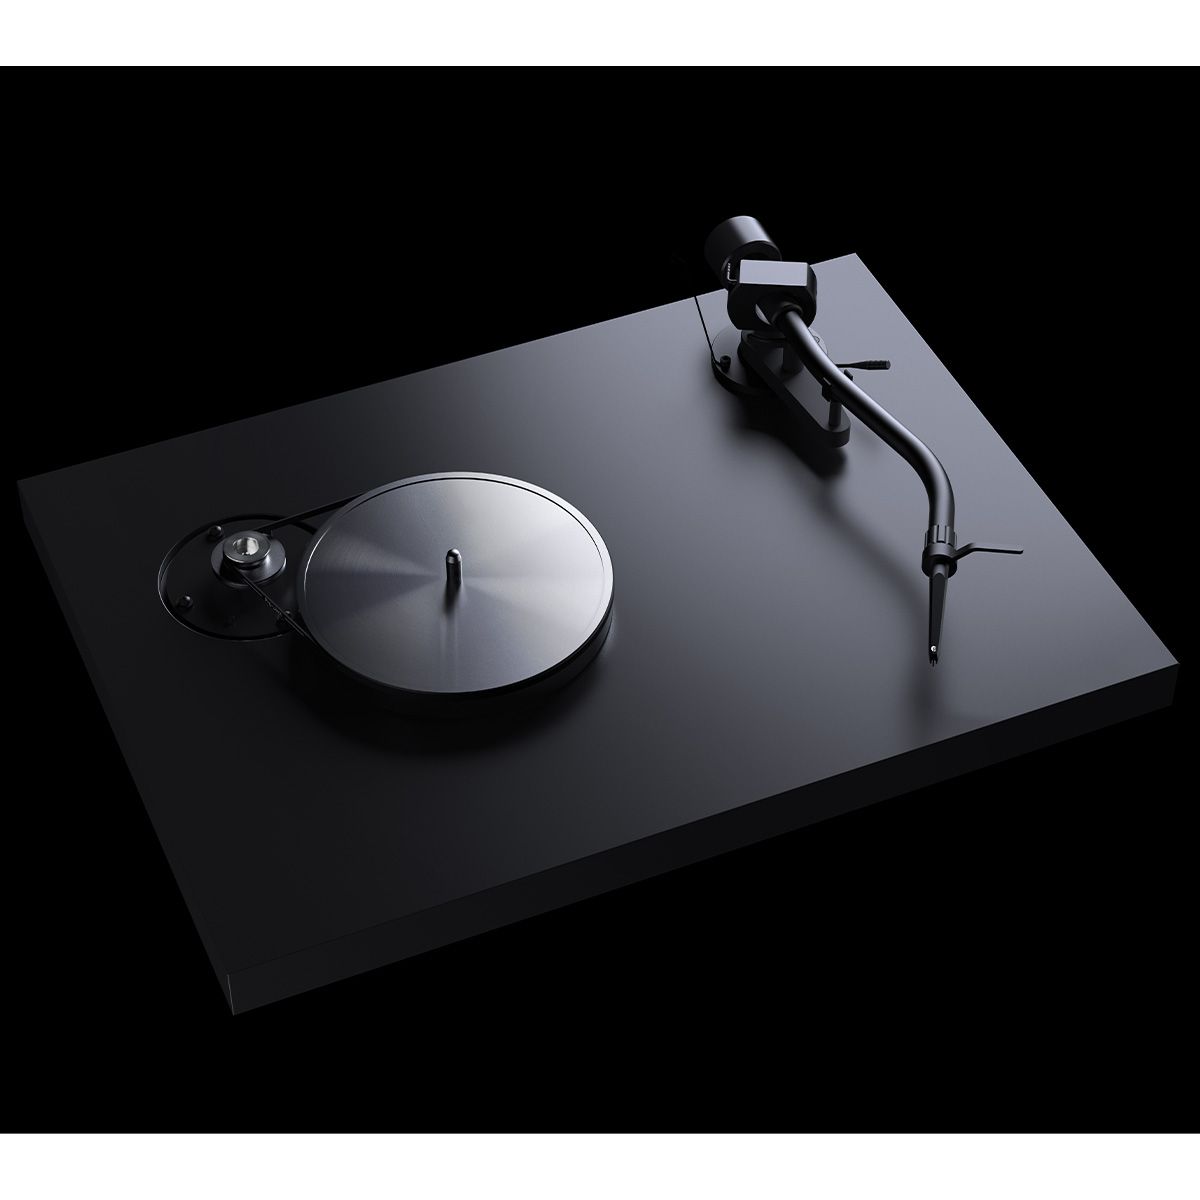 top down angle view of Pro-Ject Debut Pro S Turntable on black background showing belt